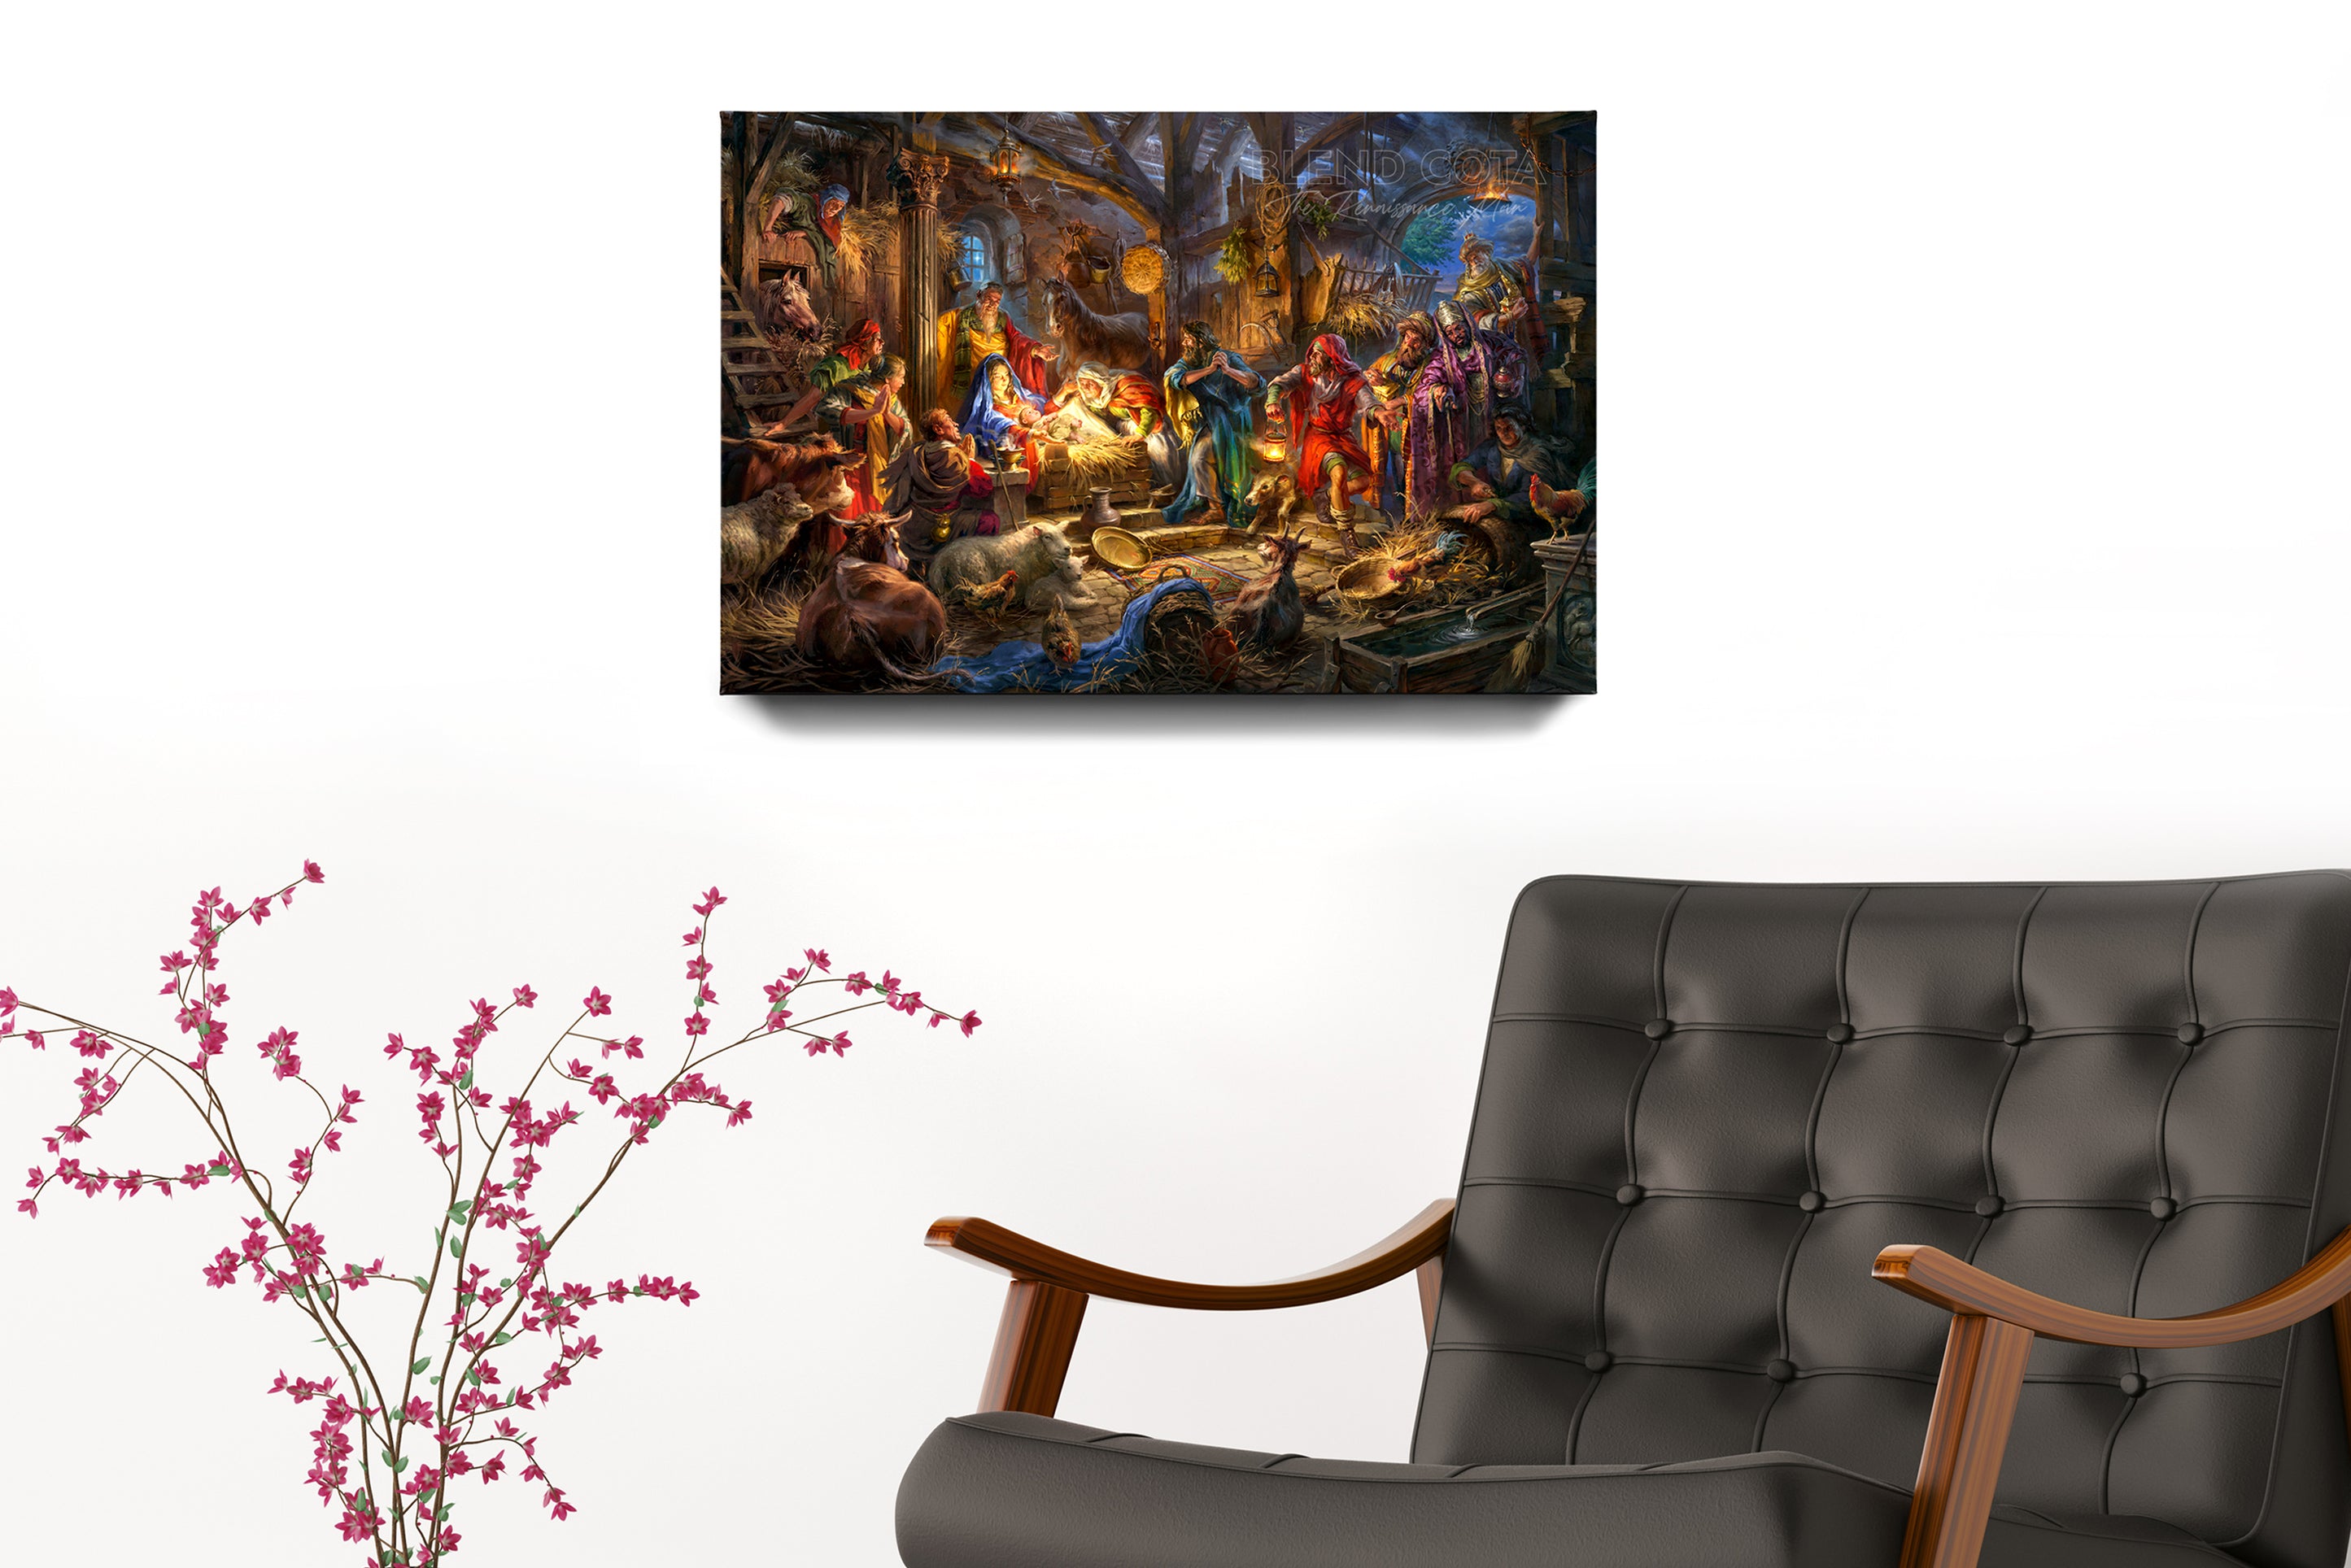 Nativitas | A King is Born Baby Jesus - Blend Cota Art Print Framed on Canvas - Blend Cota Studios - room setting with chair and painting hanging on wall